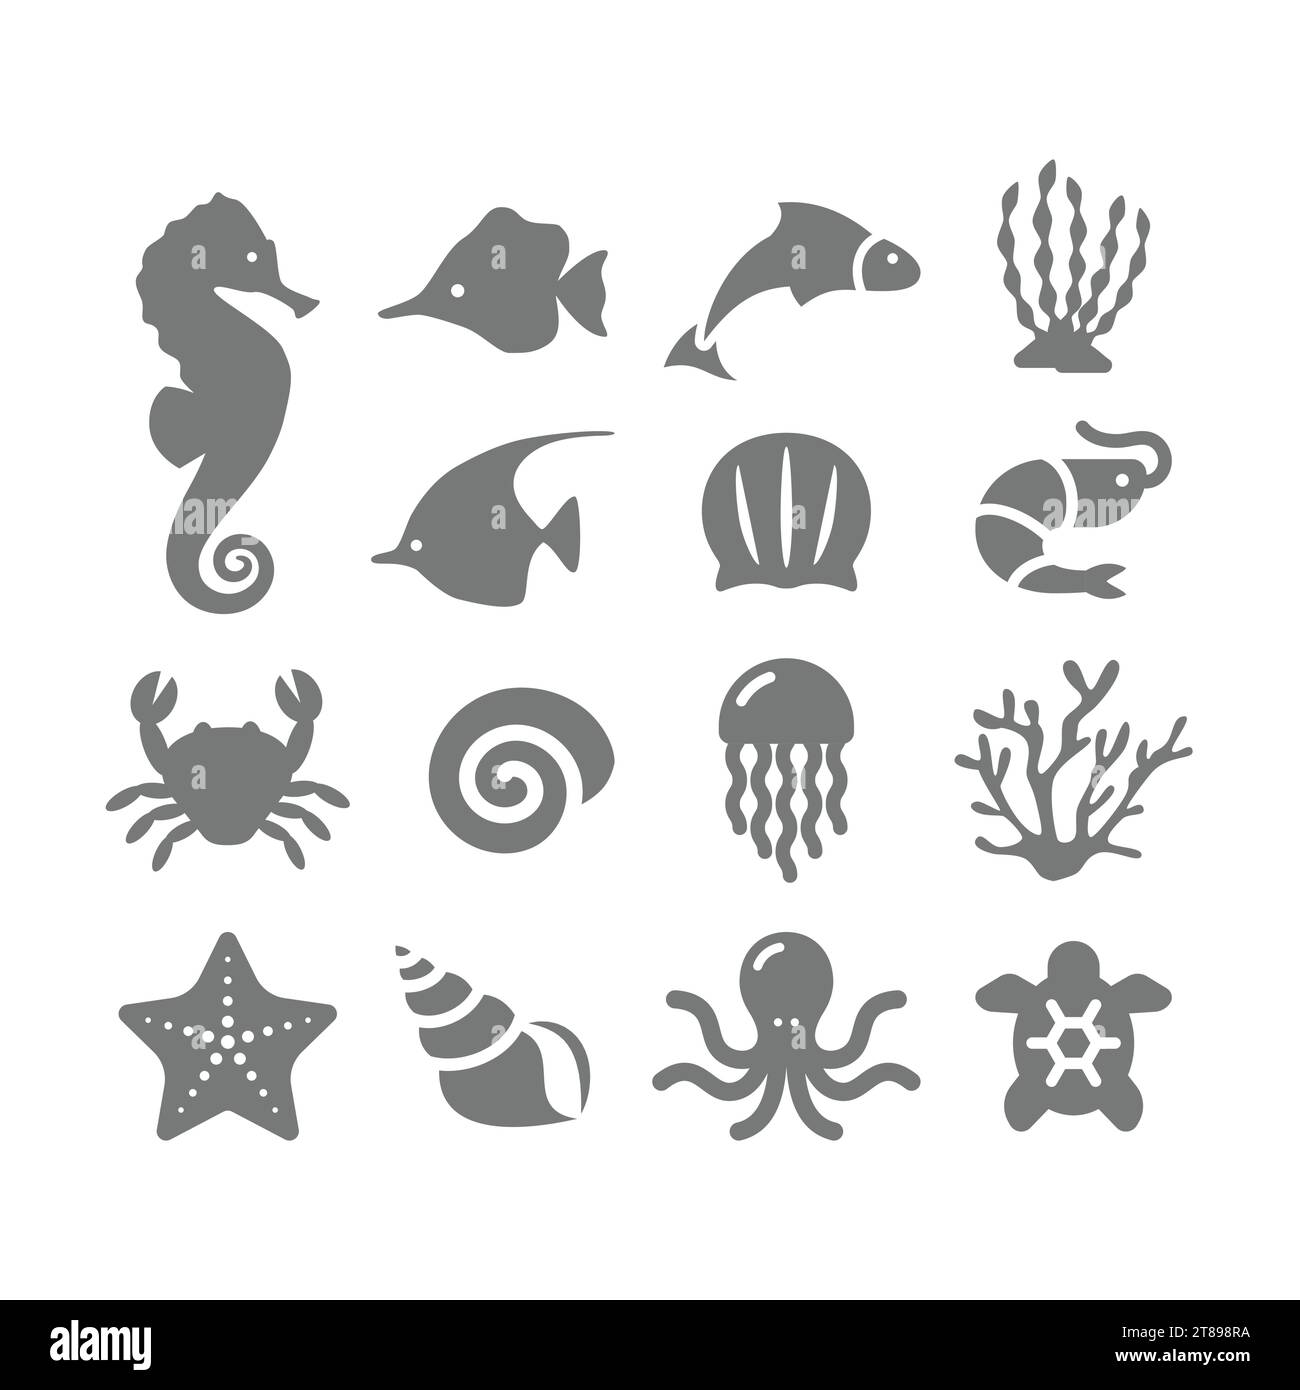 Marine or sea life, octopus and sea horse vector icons. Fish, shell and jellyfish icon set. Stock Vector